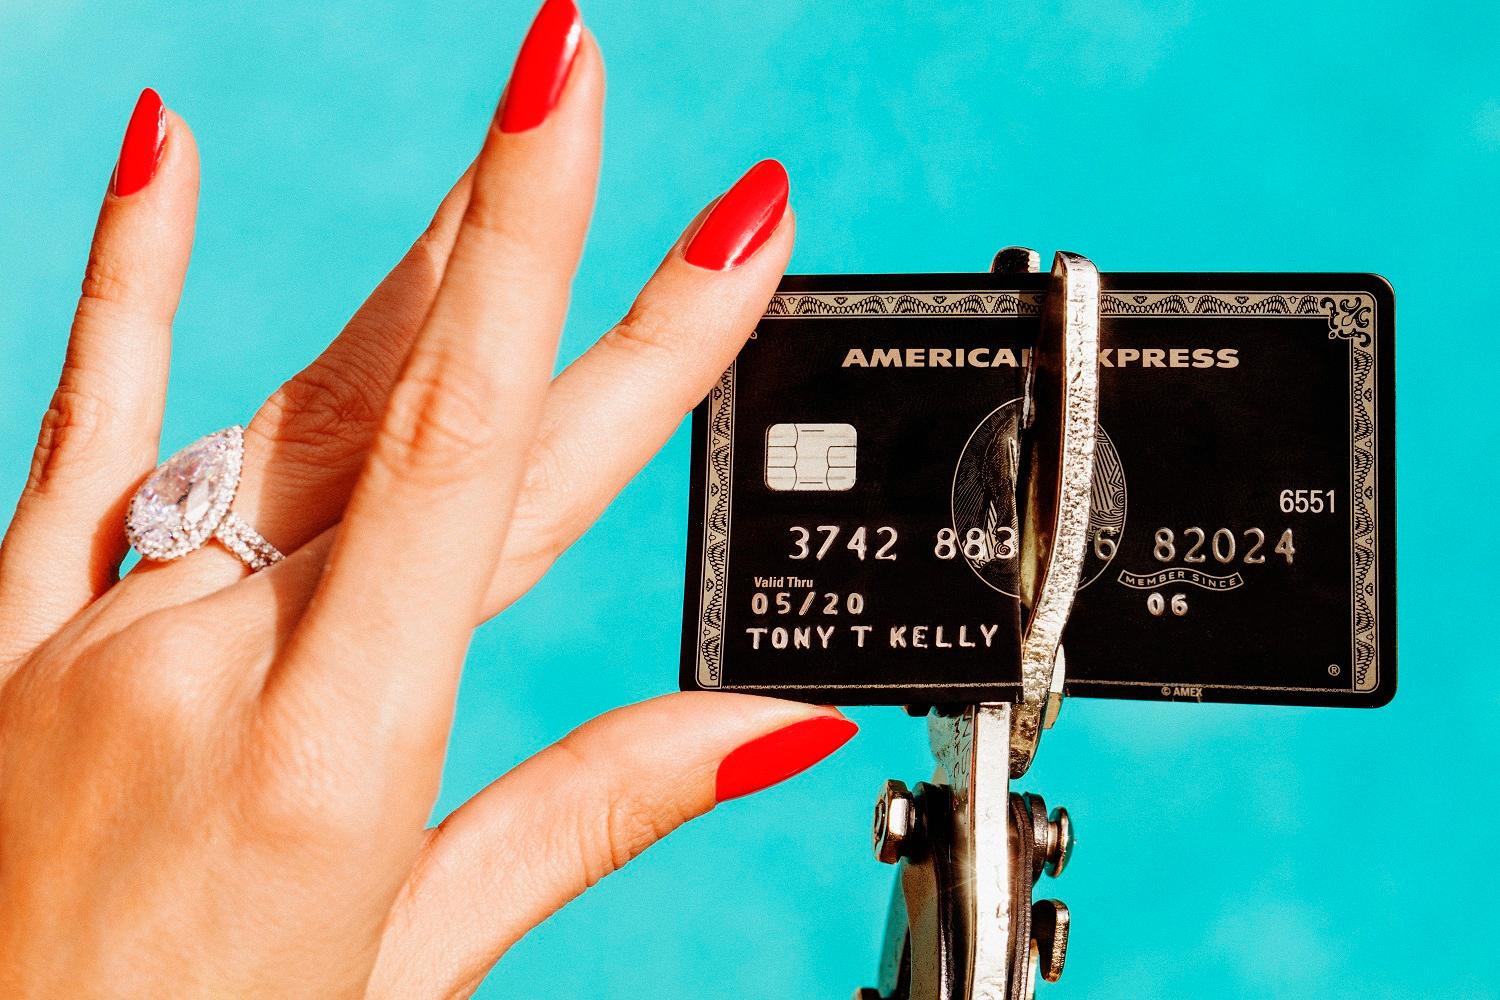 Tony Kelly Still-Life Photograph - Unbreakable - portrait of hand with red fingernails destroying a credit card